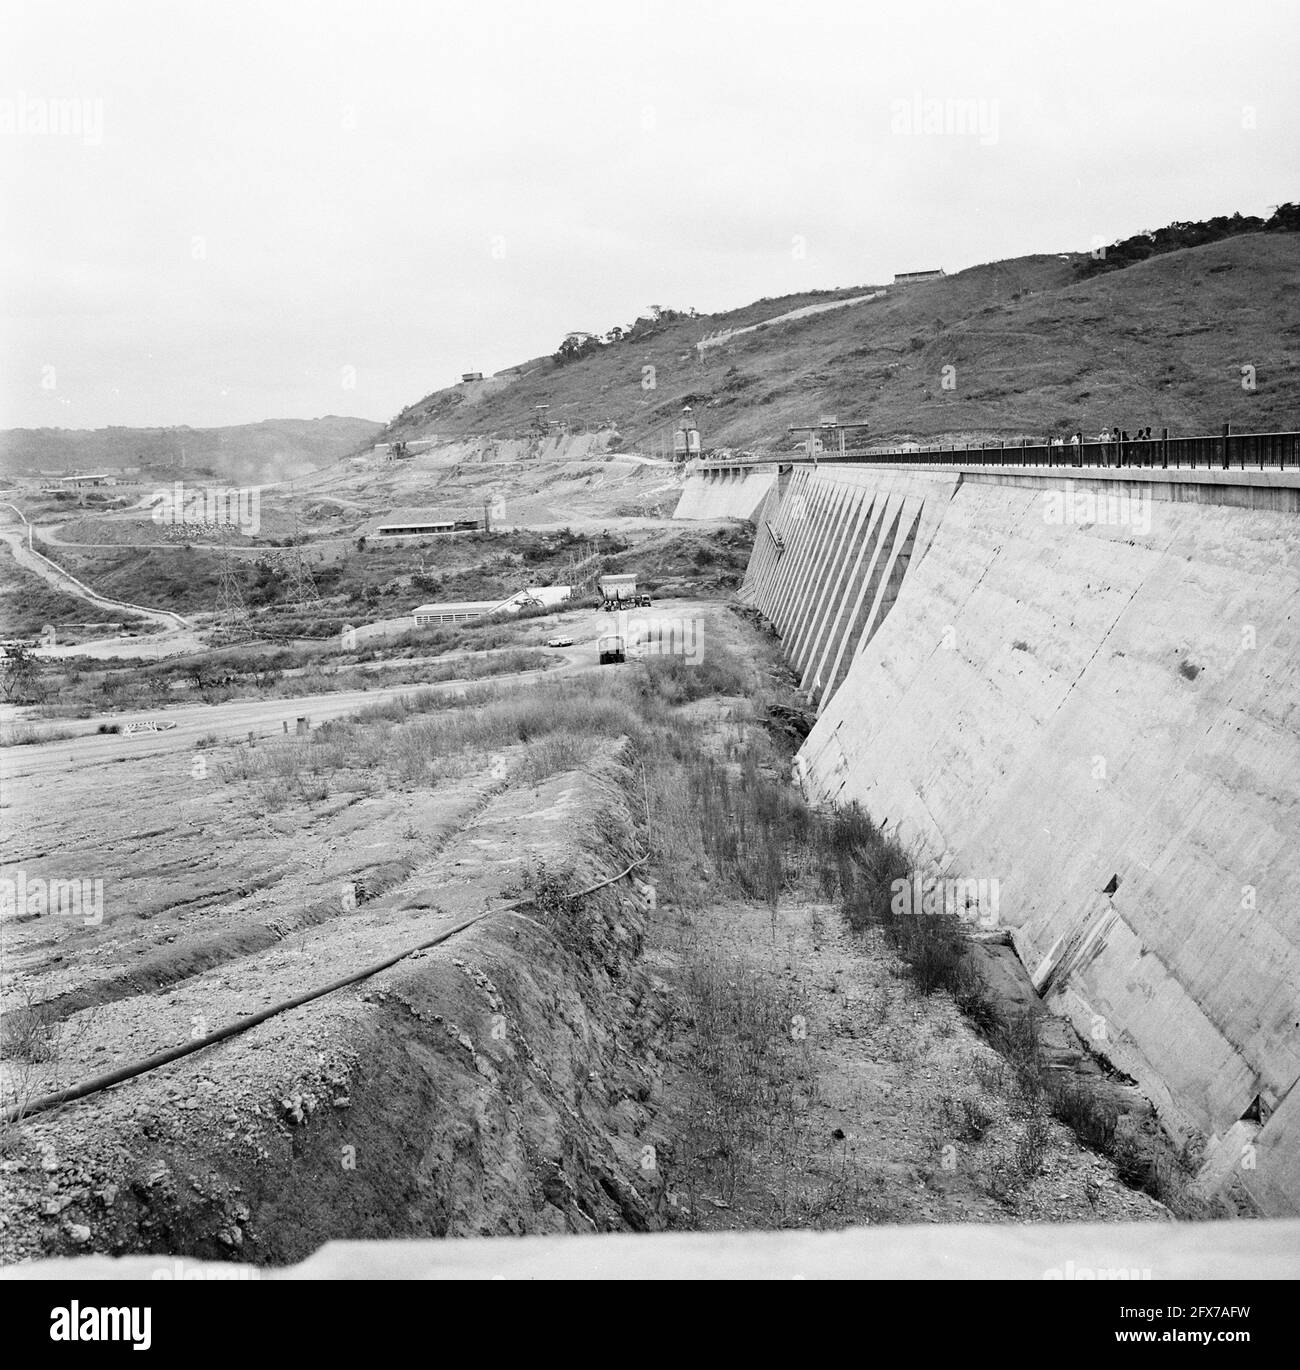 Inga project, dam in river Zaire, October 24, 1973, landscapes, rivers, dams, The Netherlands, 20th century press agency photo, news to remember, documentary, historic photography 1945-1990, visual stories, human history of the Twentieth Century, capturing moments in time Stock Photo